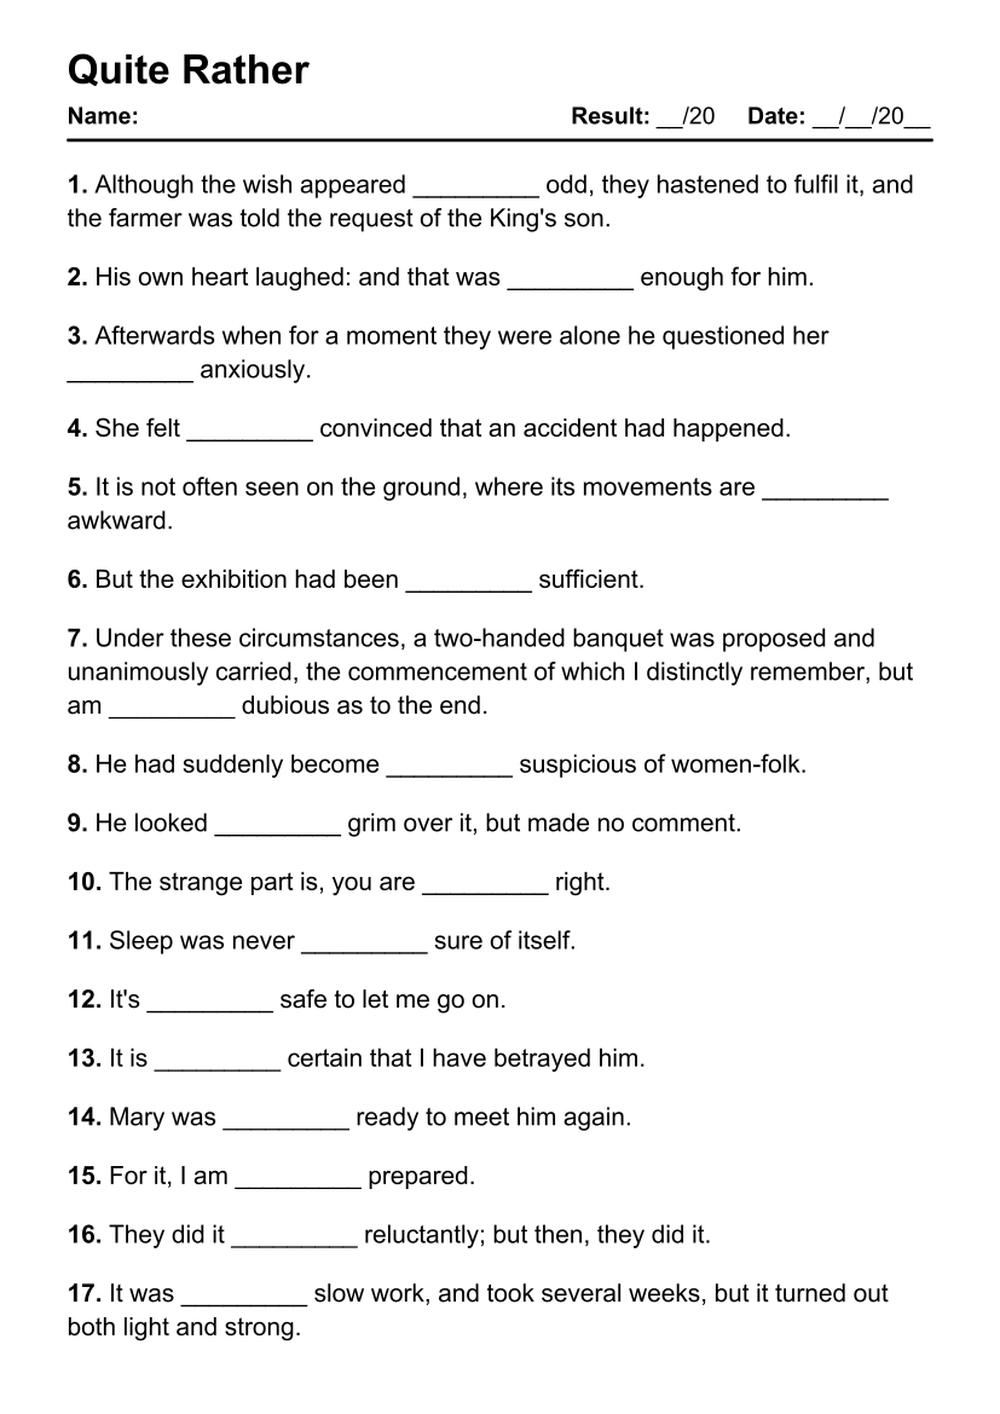 Quite Rather Exercises PDF Worksheet with Answers - Test 9